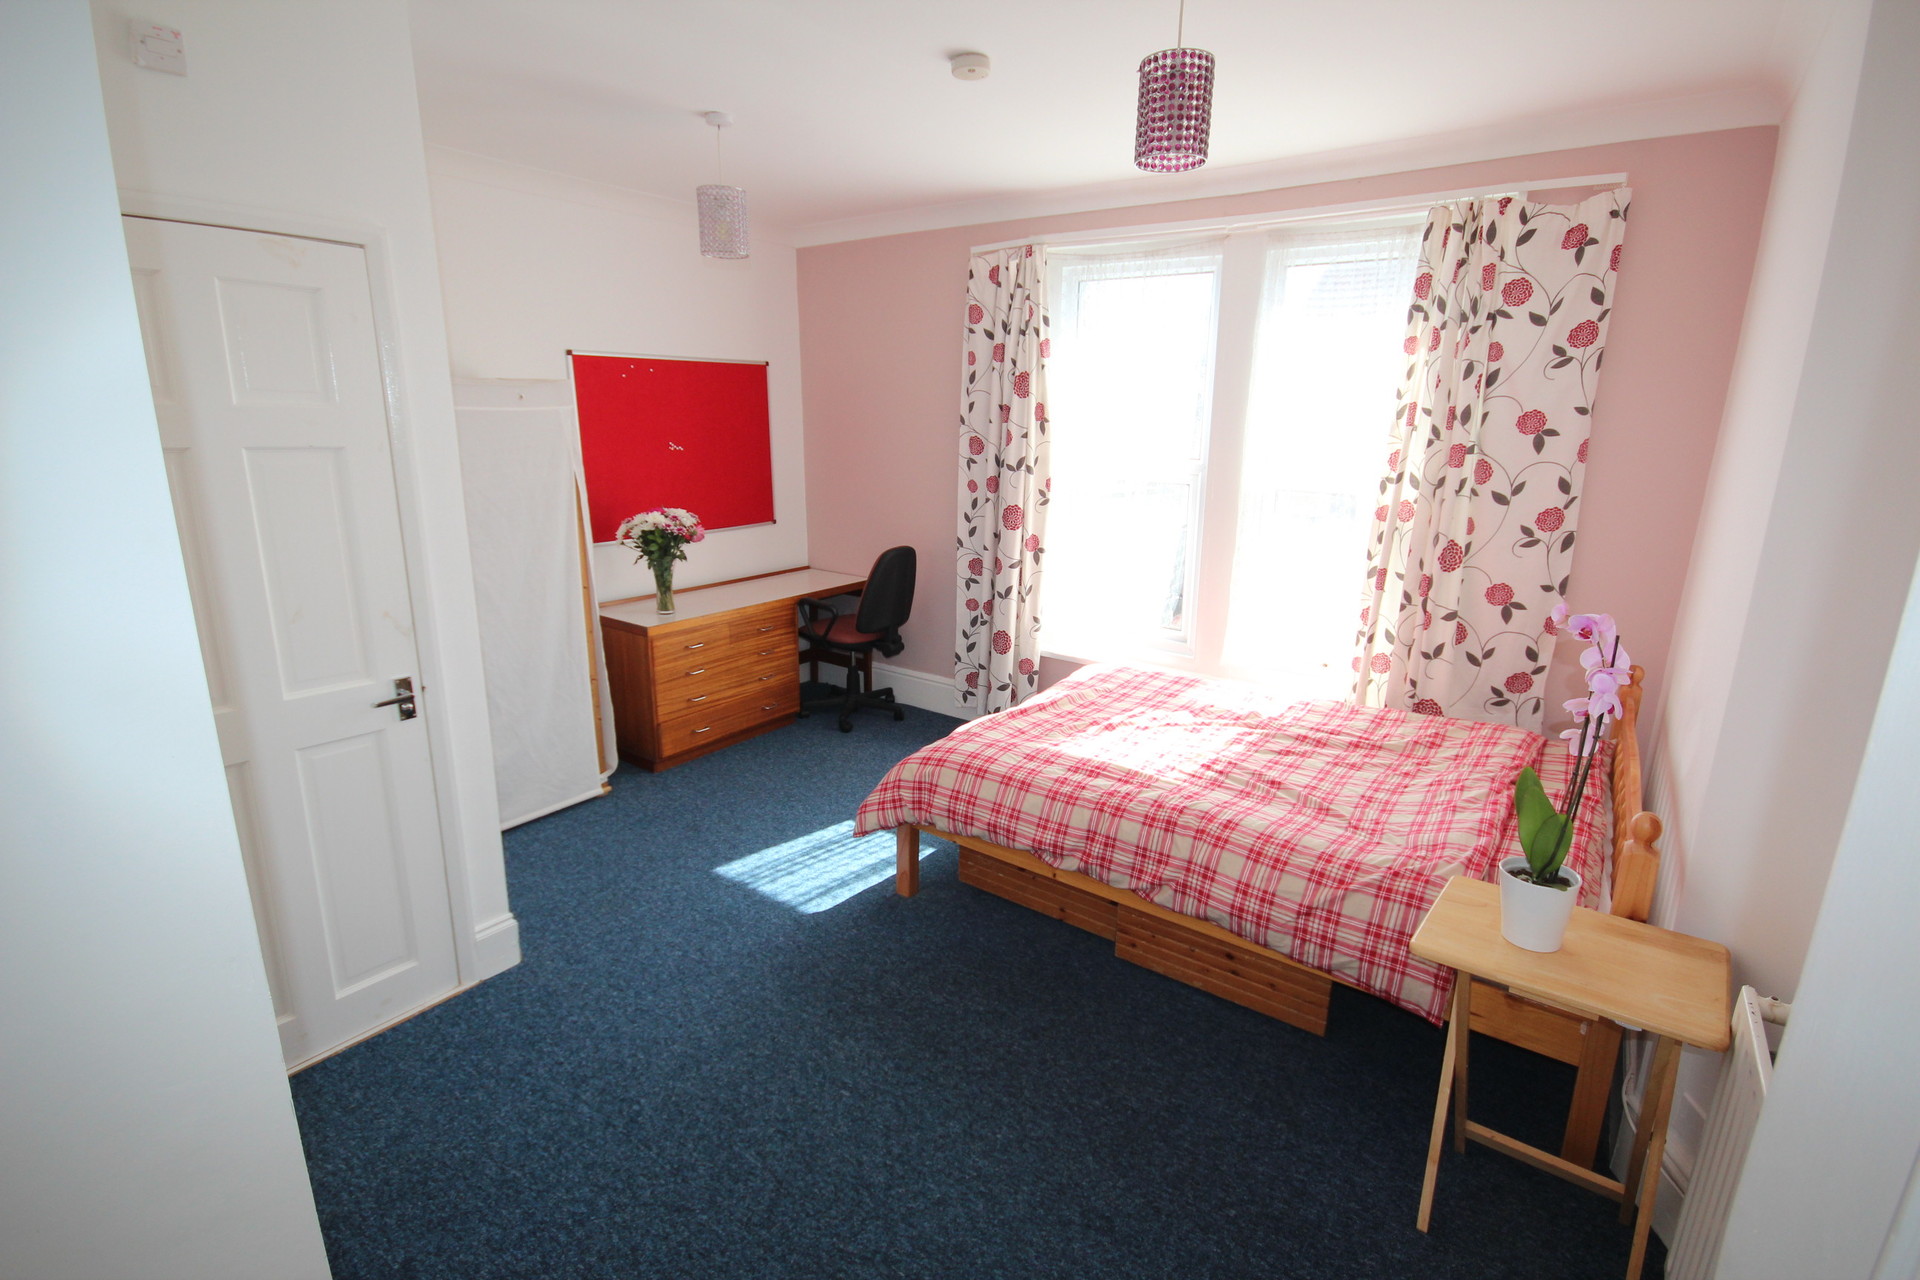 Room sharing in University Student House £400/mth (all bills included